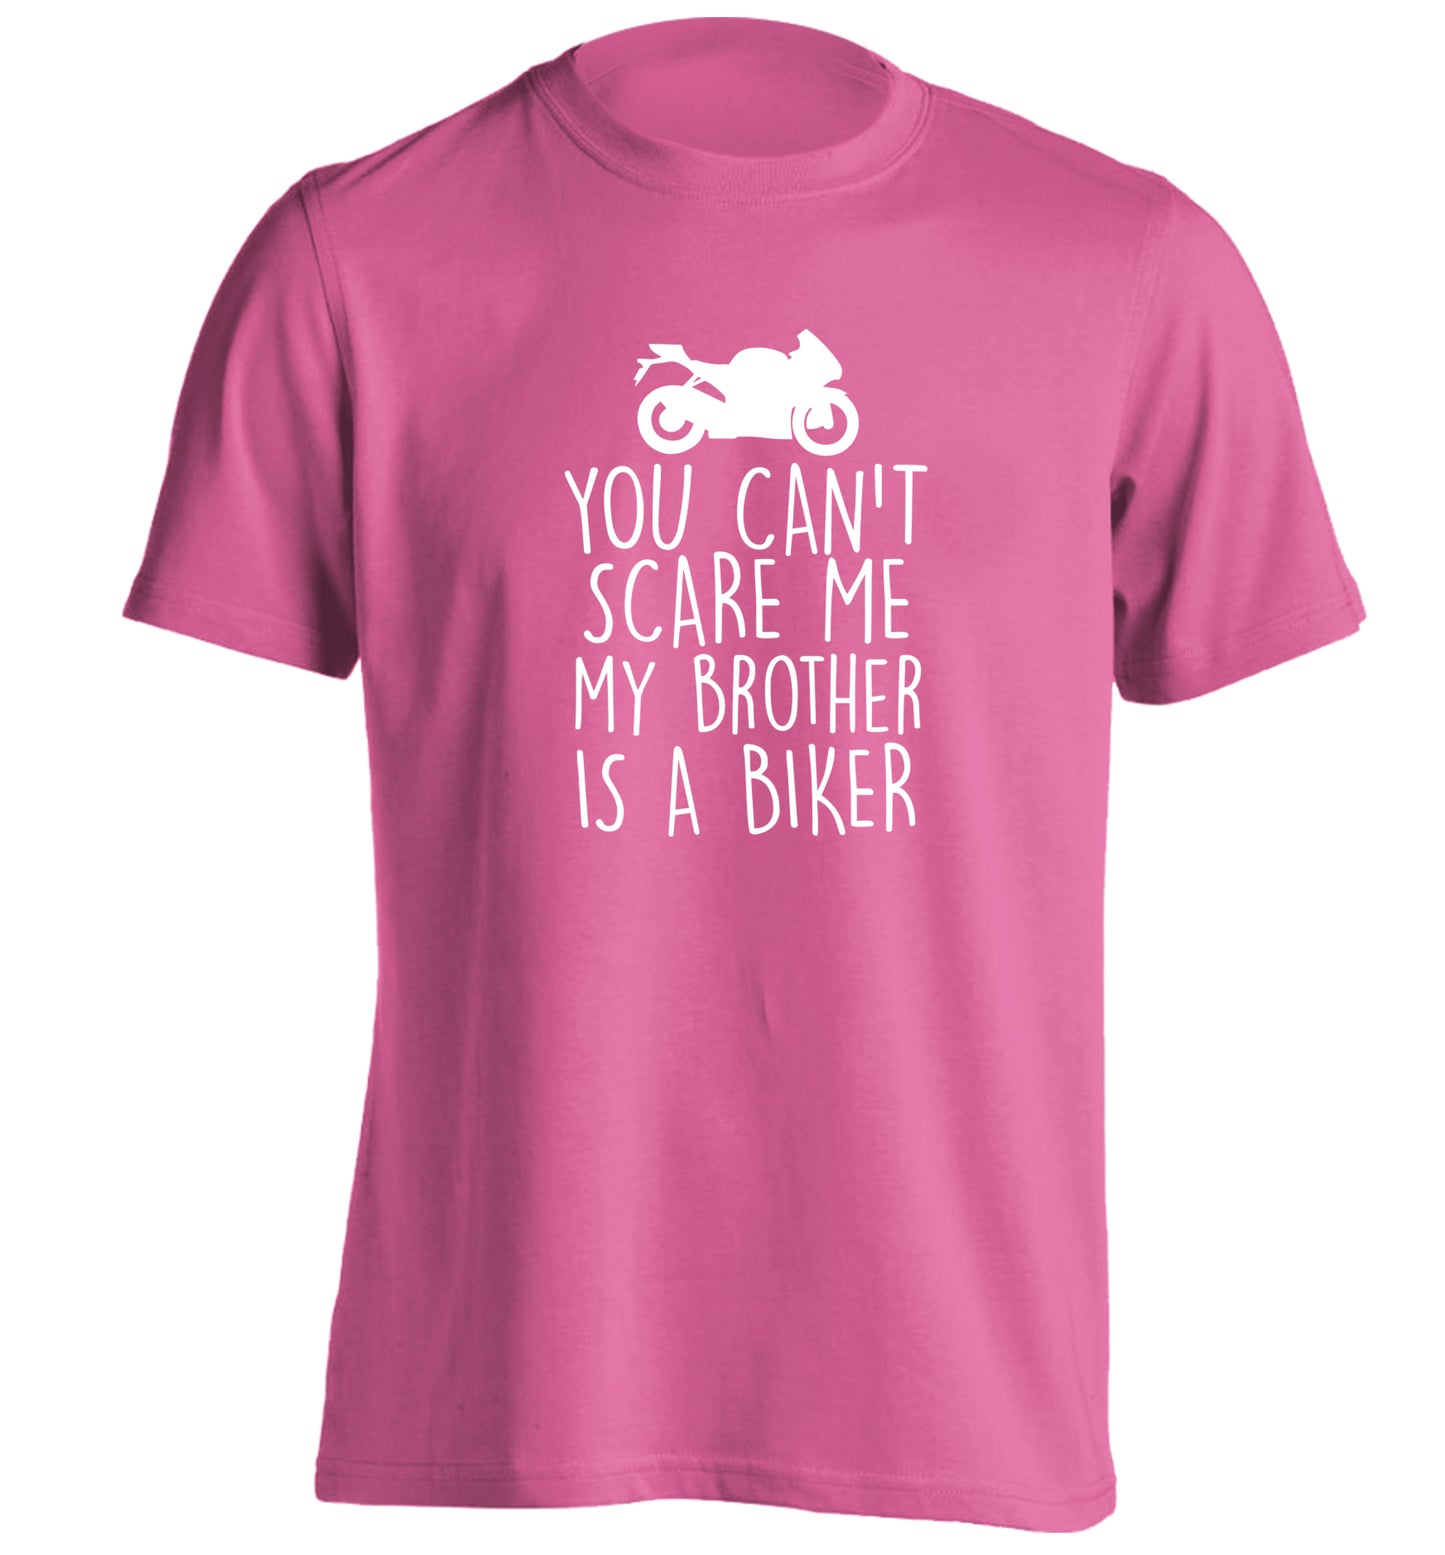 You can't scare me my brother is a biker adults unisex pink Tshirt 2XL